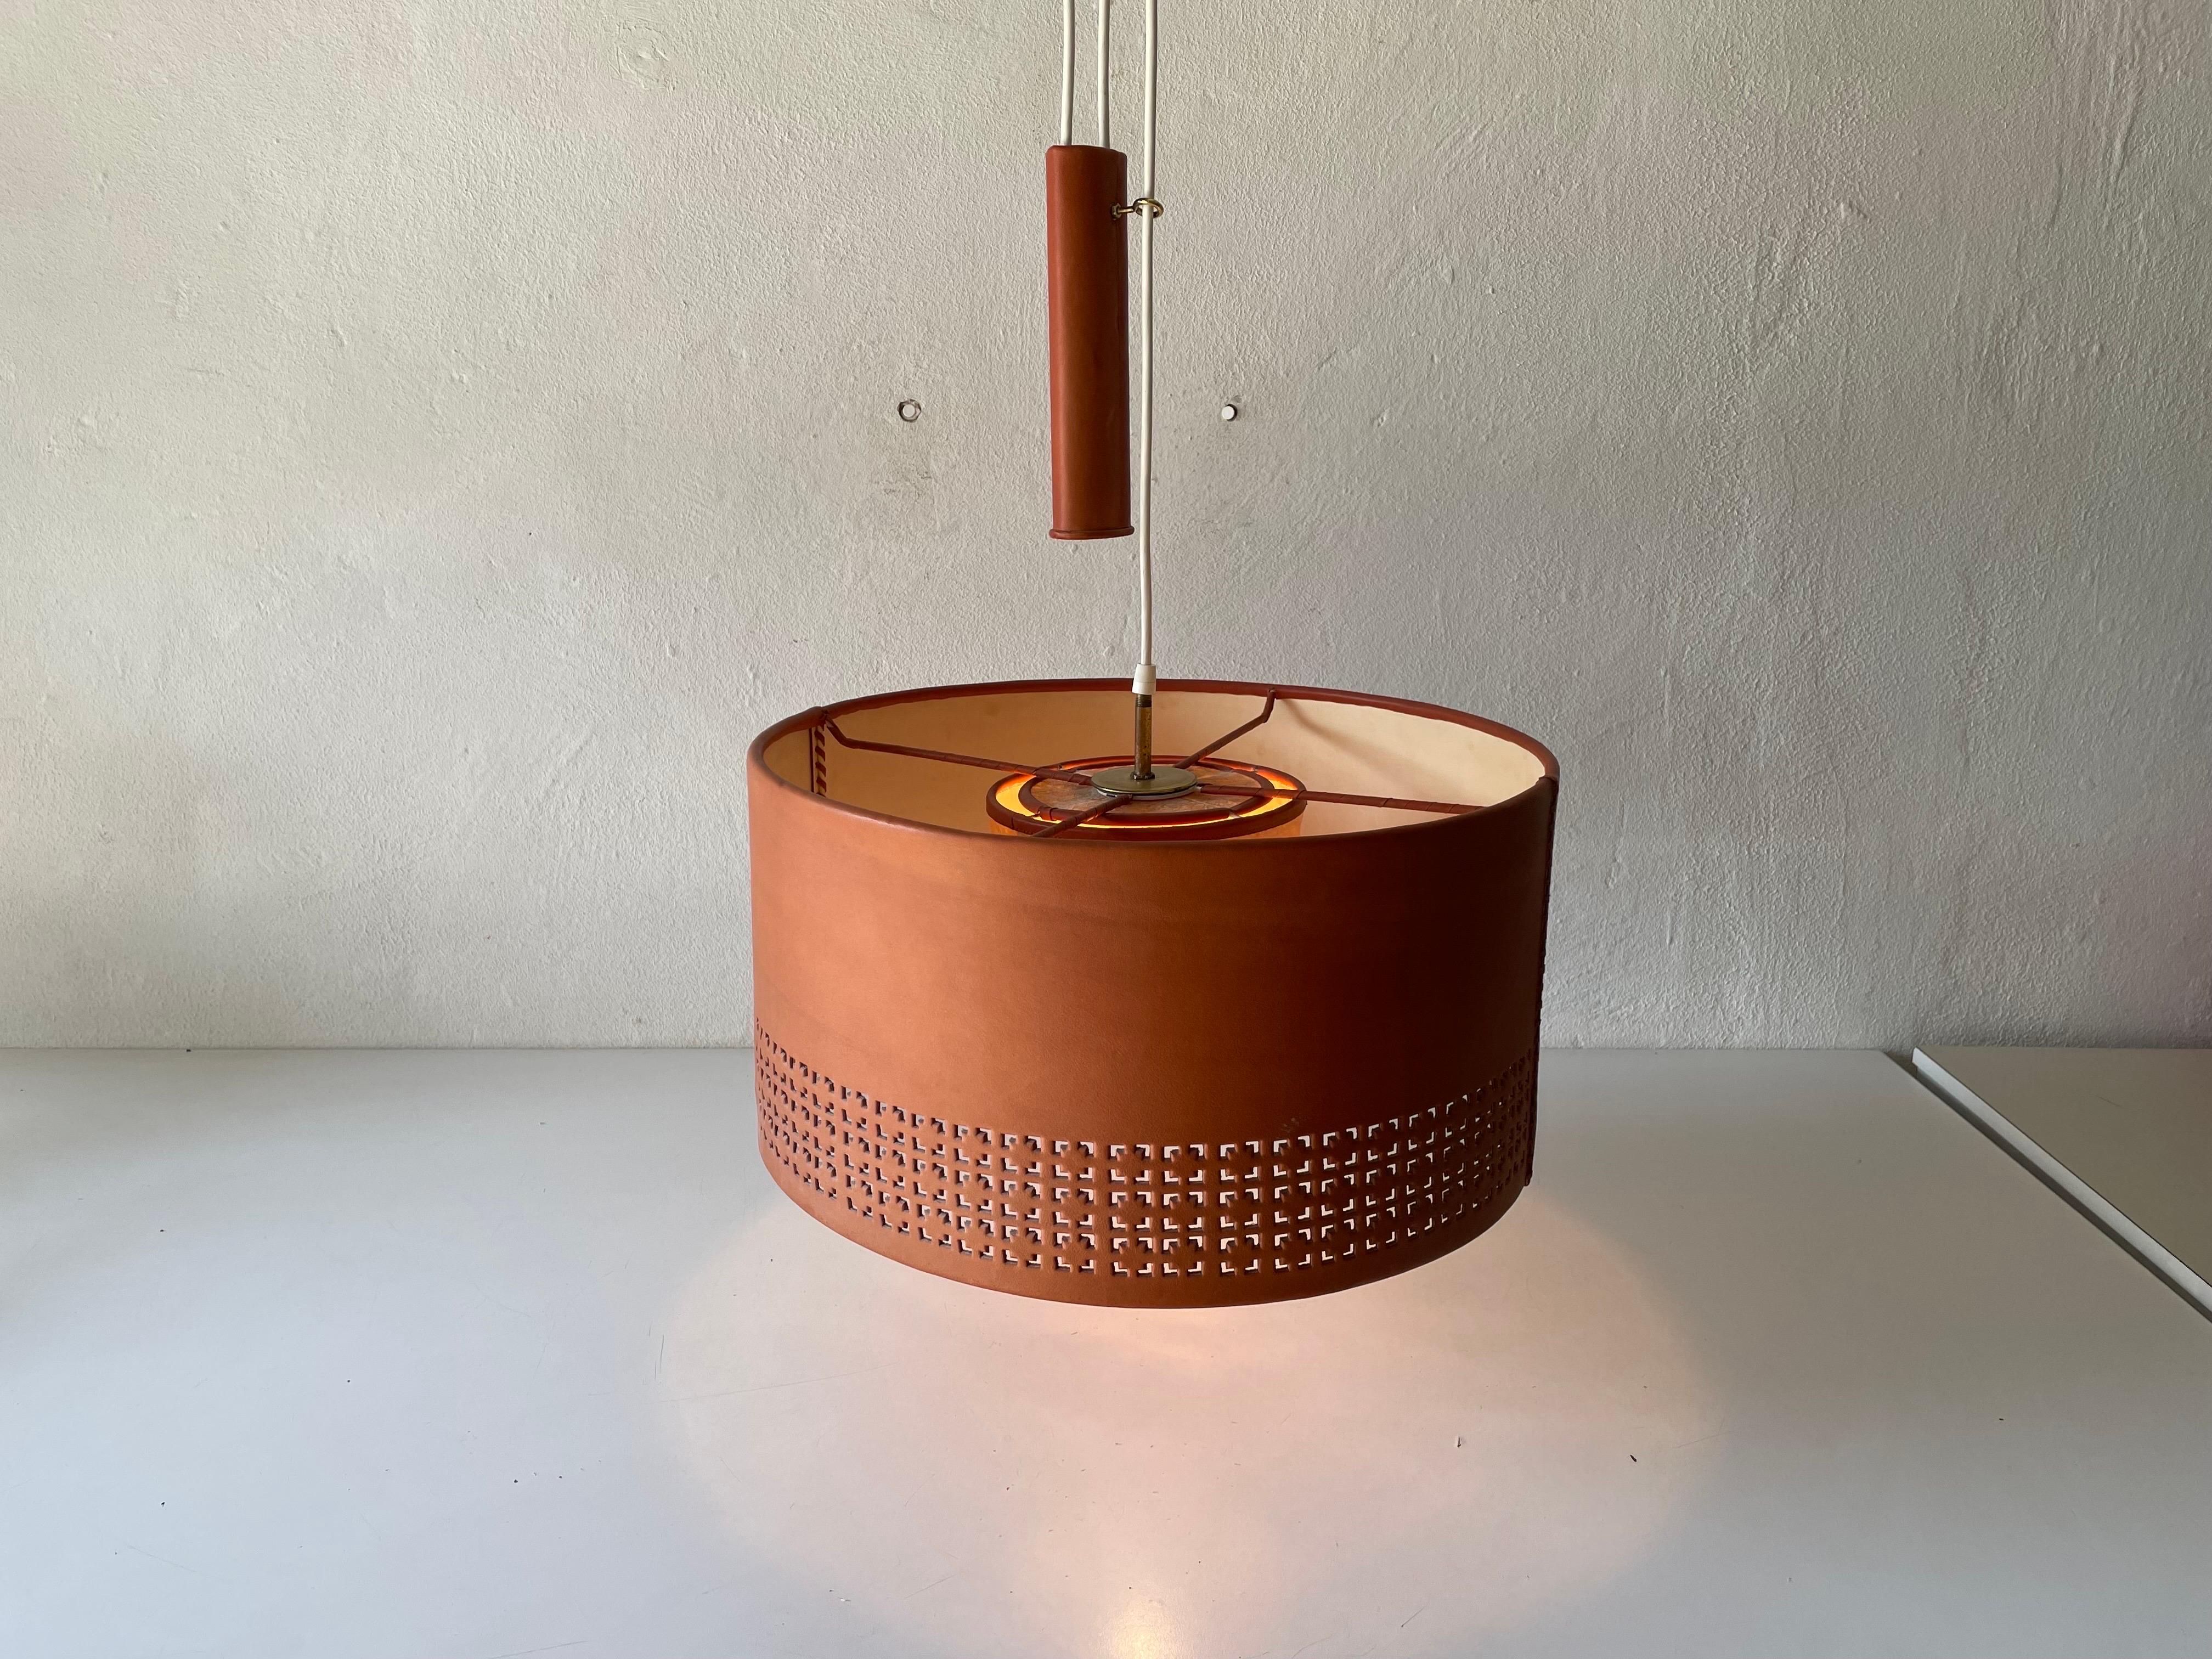 Cylindrical Leather Shade with Motifs Counterweight Pendant Lamp, 1960s, Germany For Sale 10